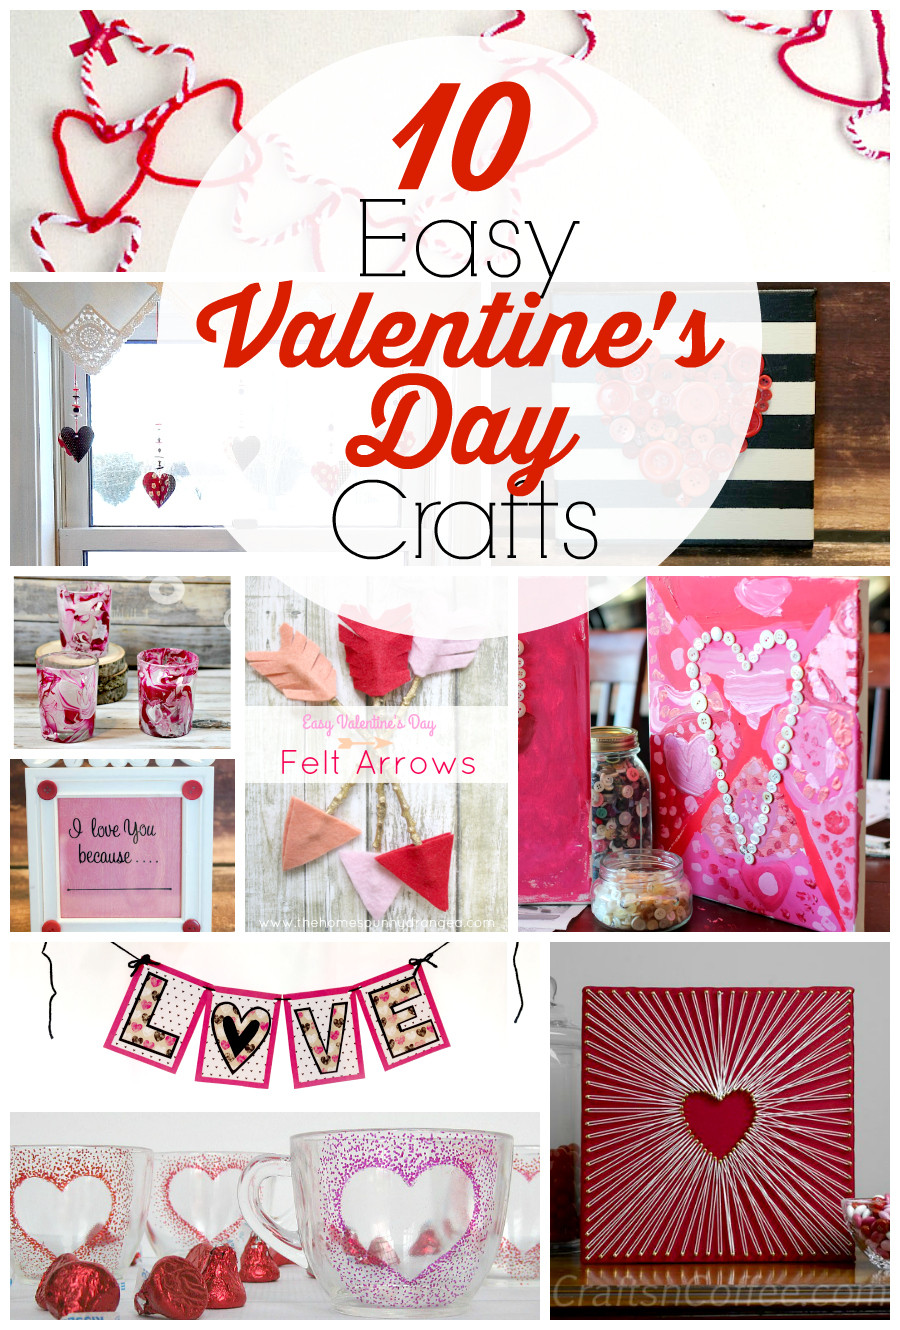 Valentine'S Day Craft Ideas For Adults
 10 Easy Valentine’s Day Crafts for Adults